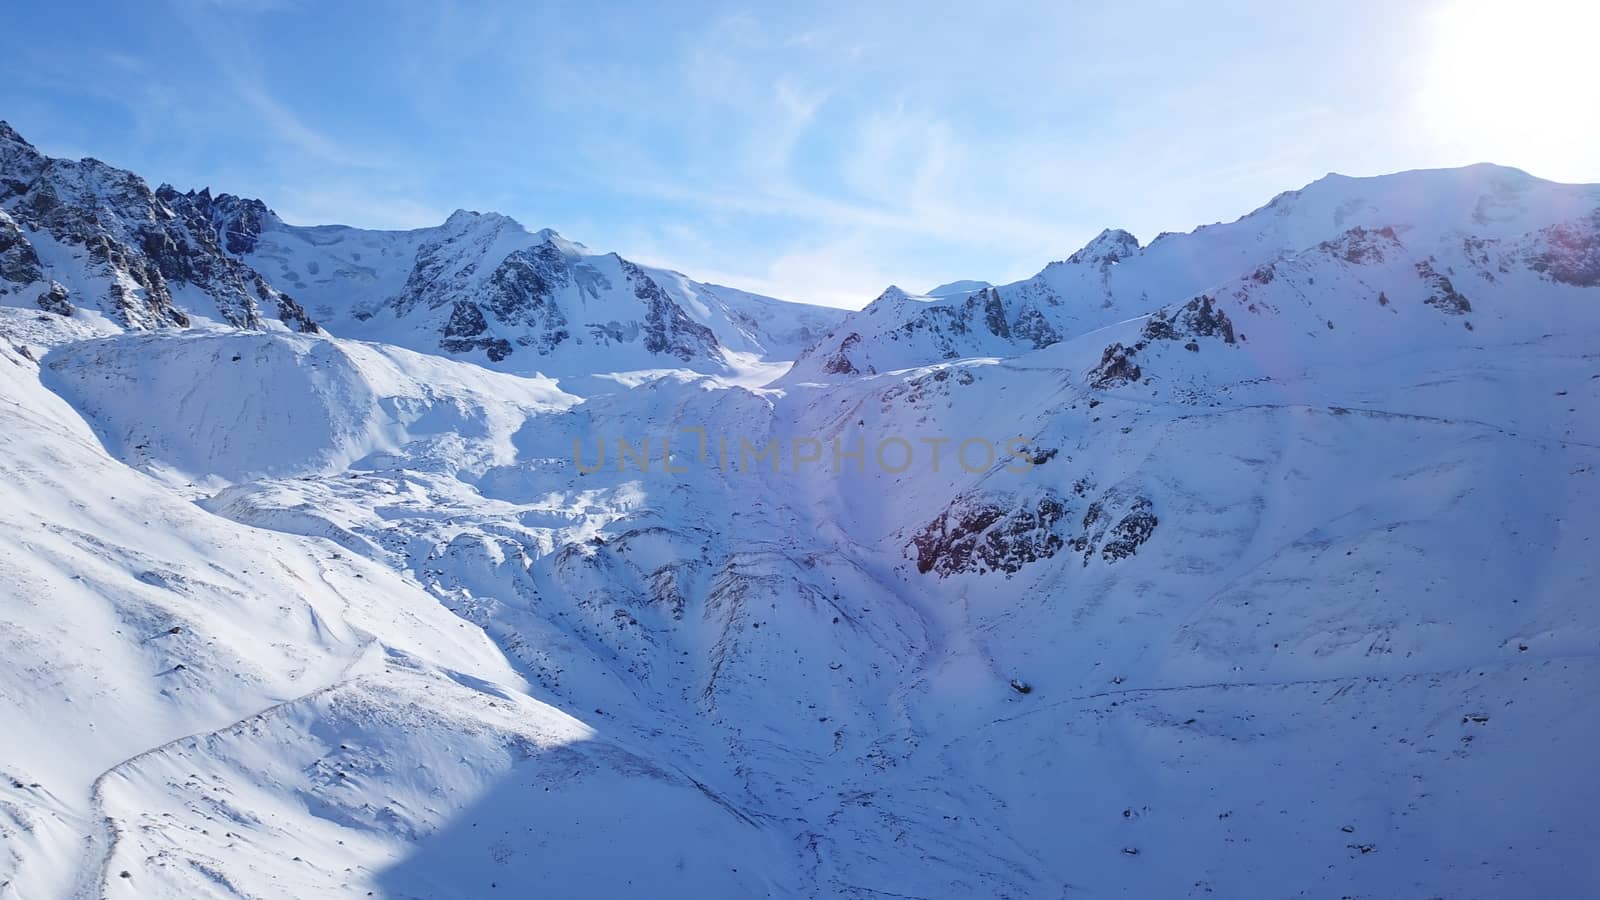 Snow mountain peaks with rocks. View from drone. In places, you can see glaciers, large rocks and rocks. Huge drifts of snow covered mountains. Dangerous place. Blue sky and sun. Shadow of the peaks.